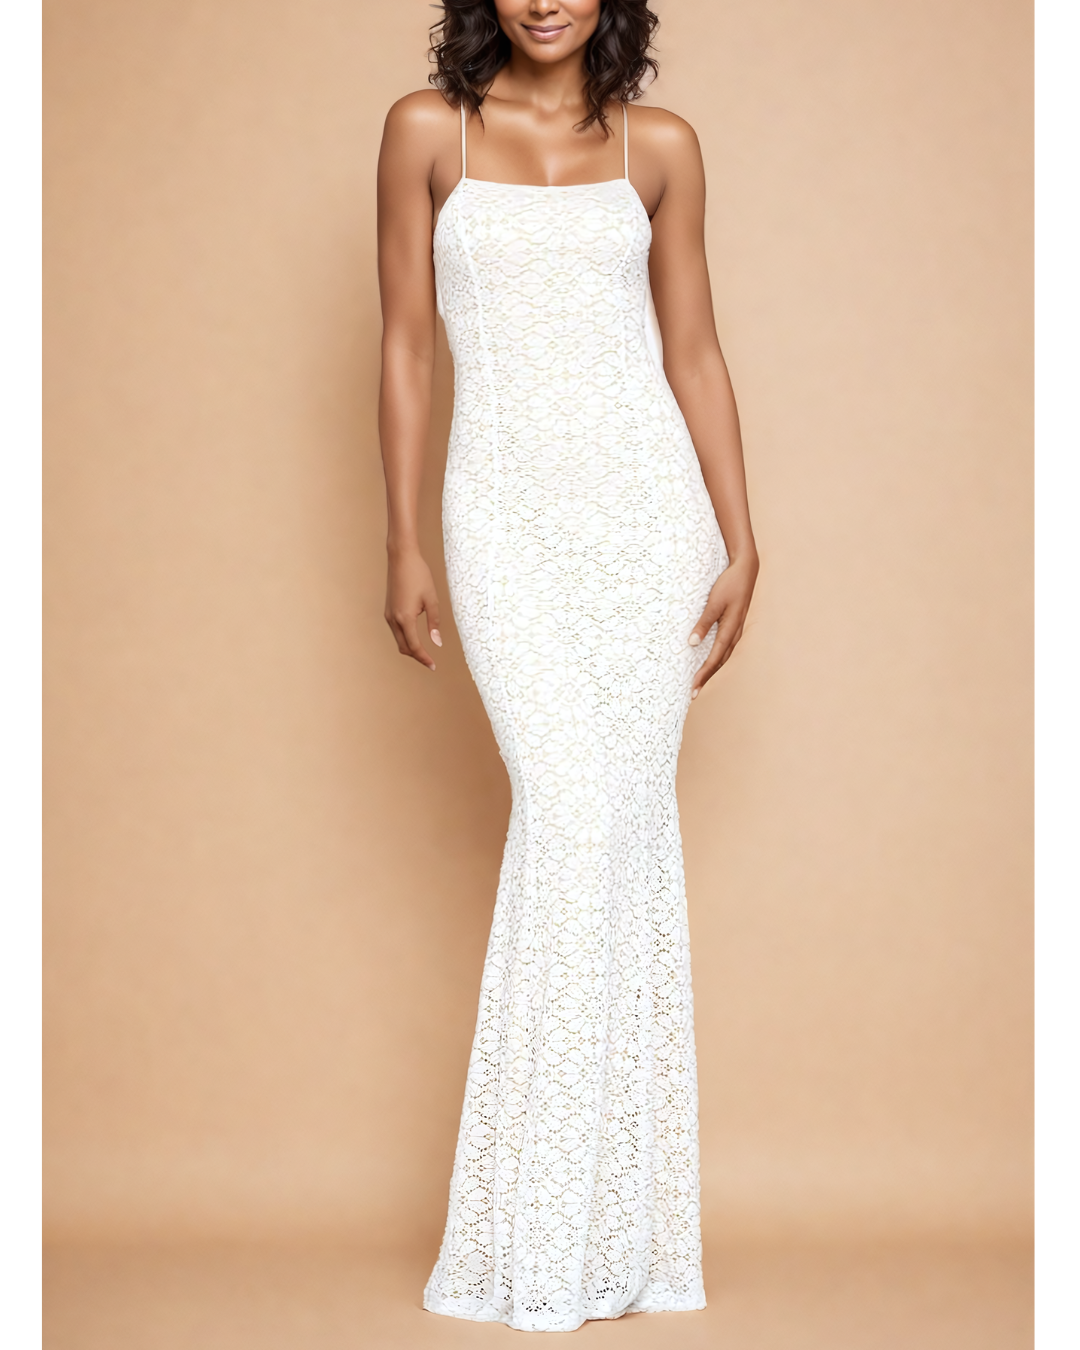 Intricate Lace Mermaid Gown with Open Back Detail - White